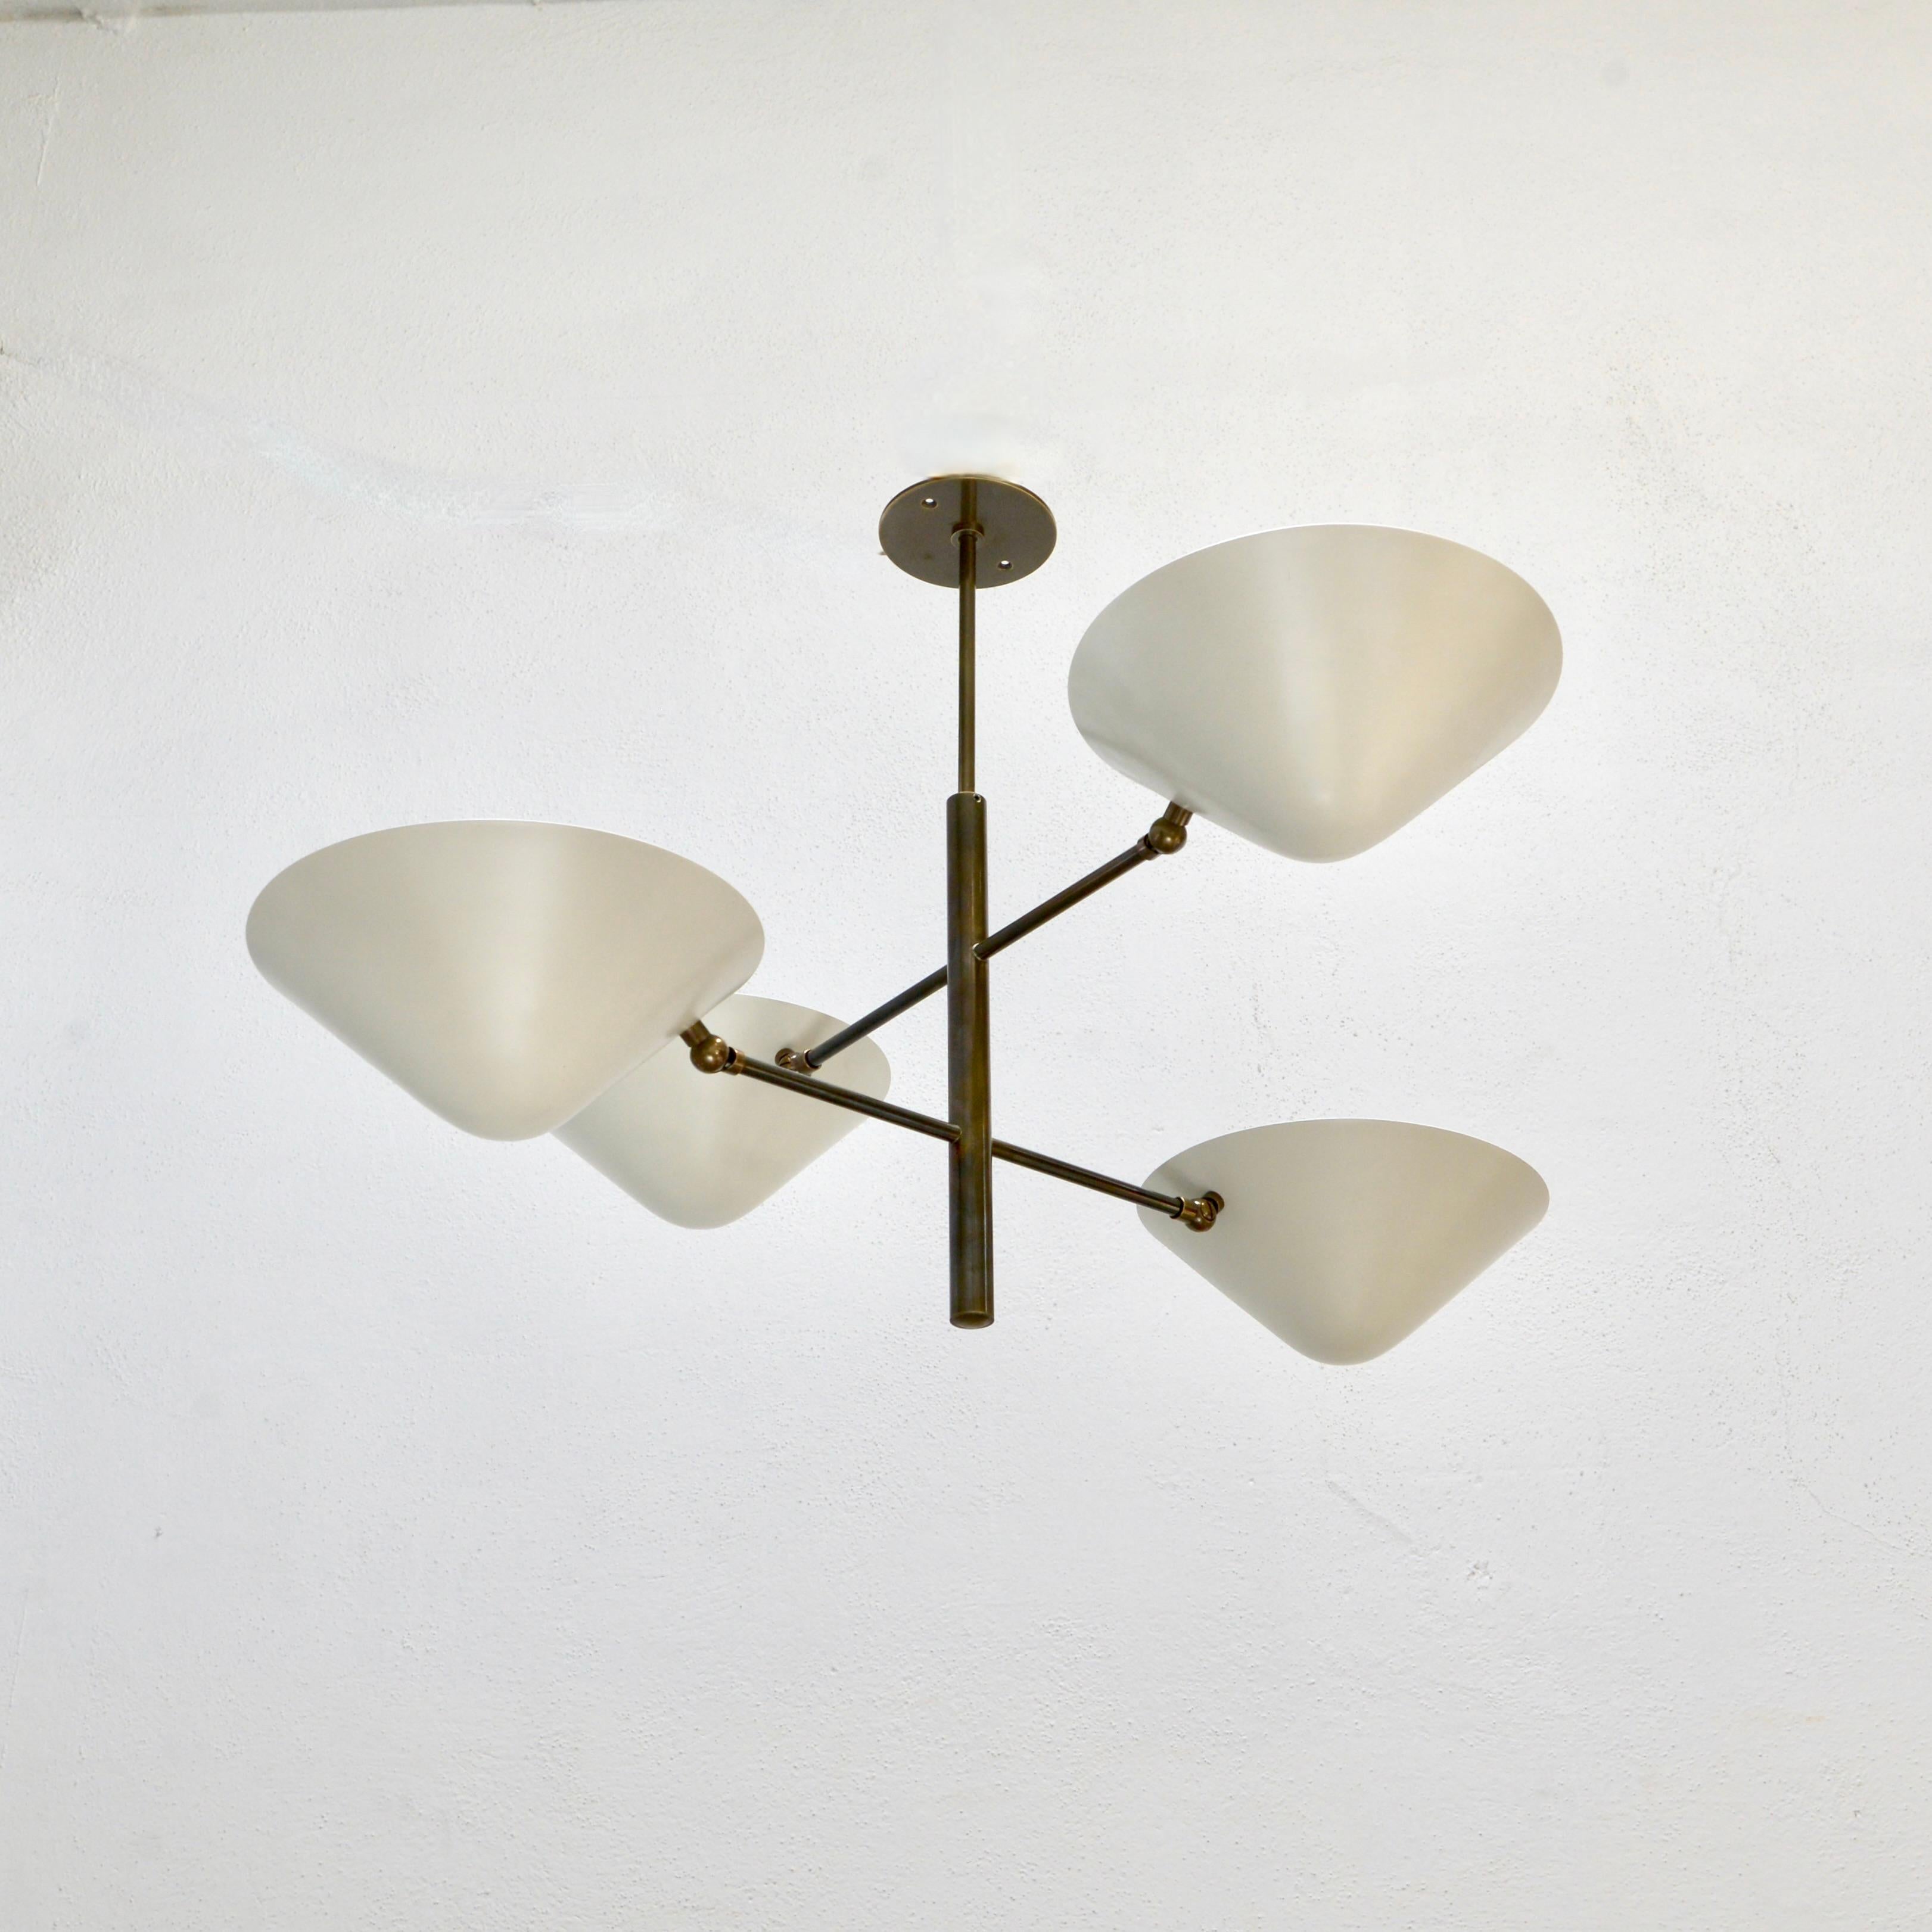 This organic inspired chandelier is a smaller version of the Off White Tree Chandelier. These fixtures combine geometry with botanical aspects. This smaller inspiration has 4 top open shades for indirect lighting. Wired with a single E26 medium